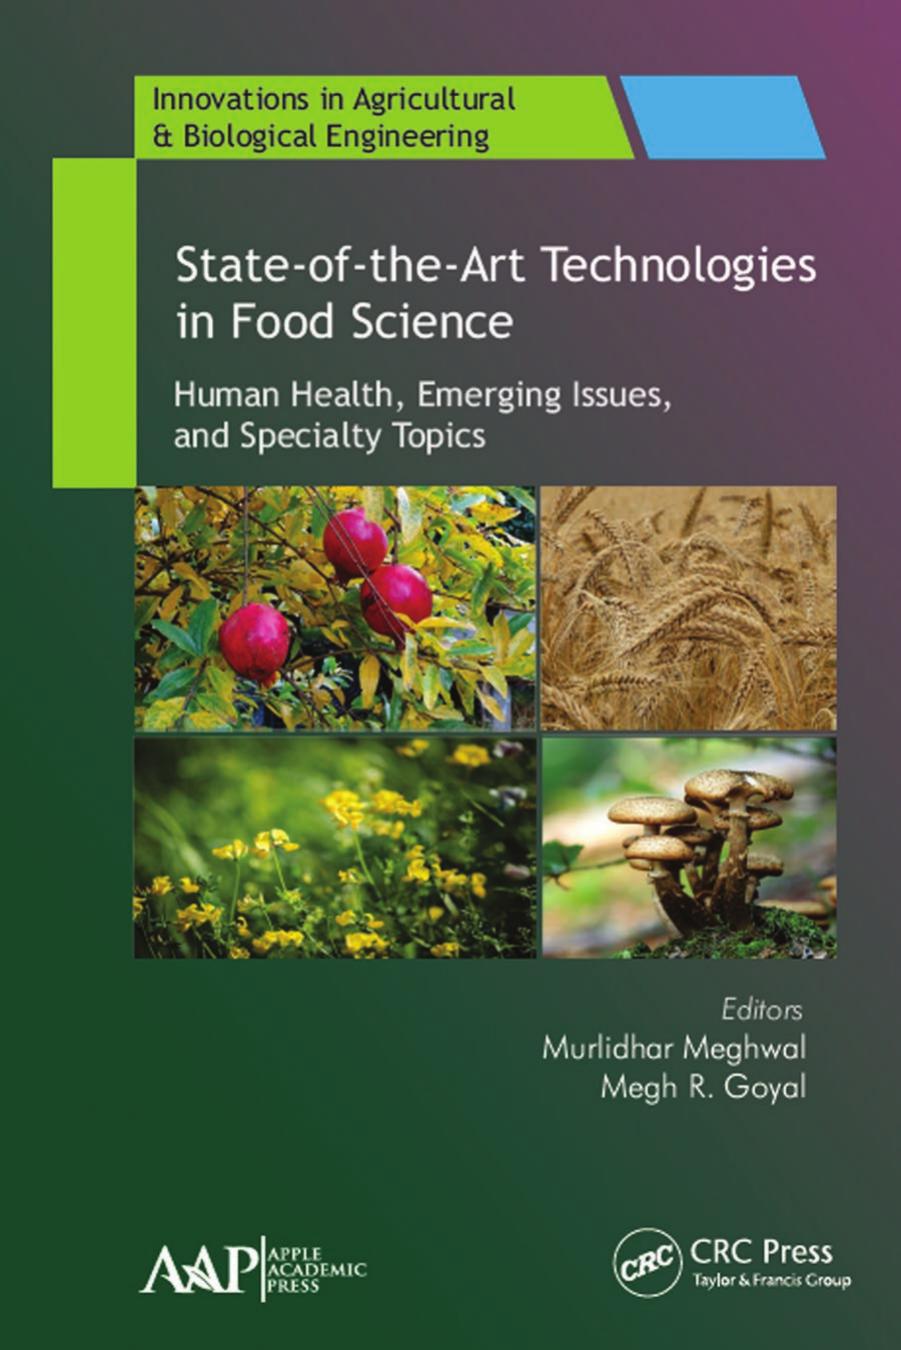 STATE-OF-THE-ART TECHNOLOGIES IN FOOD SCIENCE: Human Health, Emerging Issues, and Specialty Topics